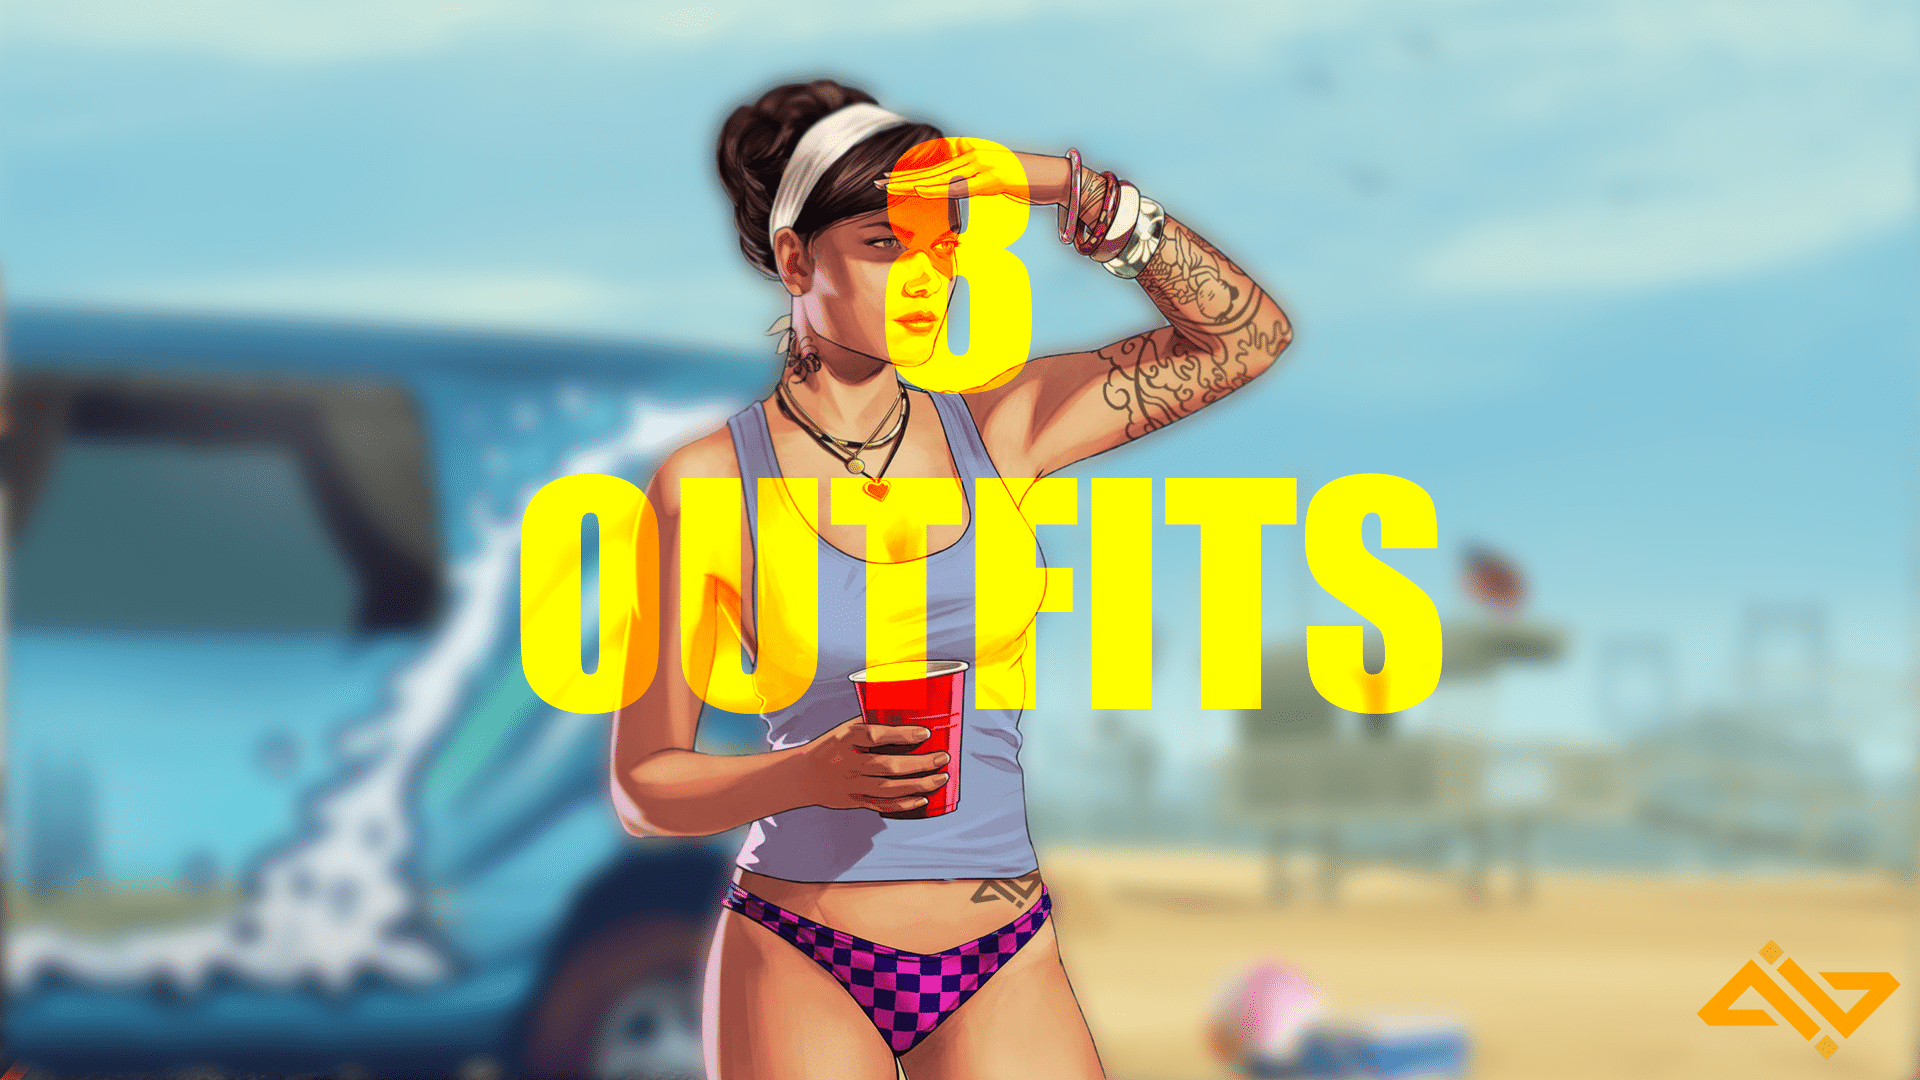 8 Best GTA Online Female Outfit Ideas: Top Picks - WhatIfGaming